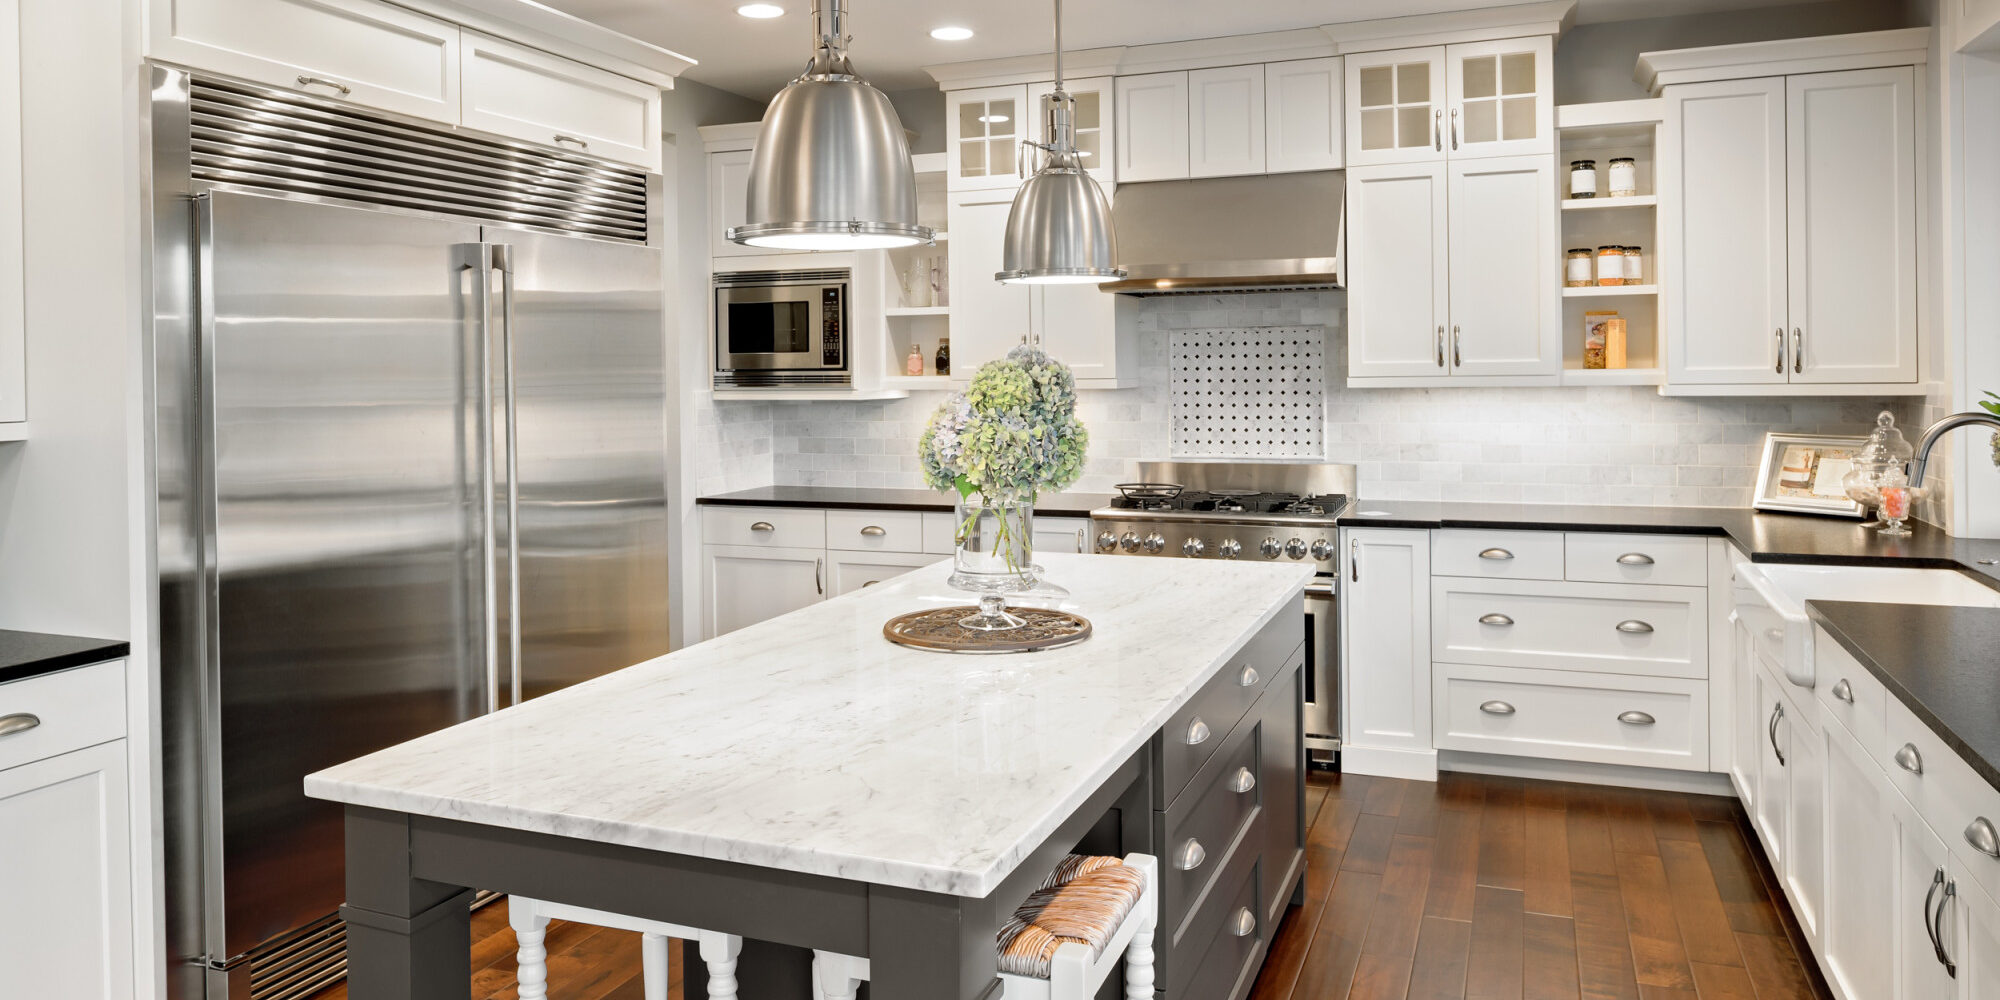 10 Kitchen Cabinet Refacing Ideas You